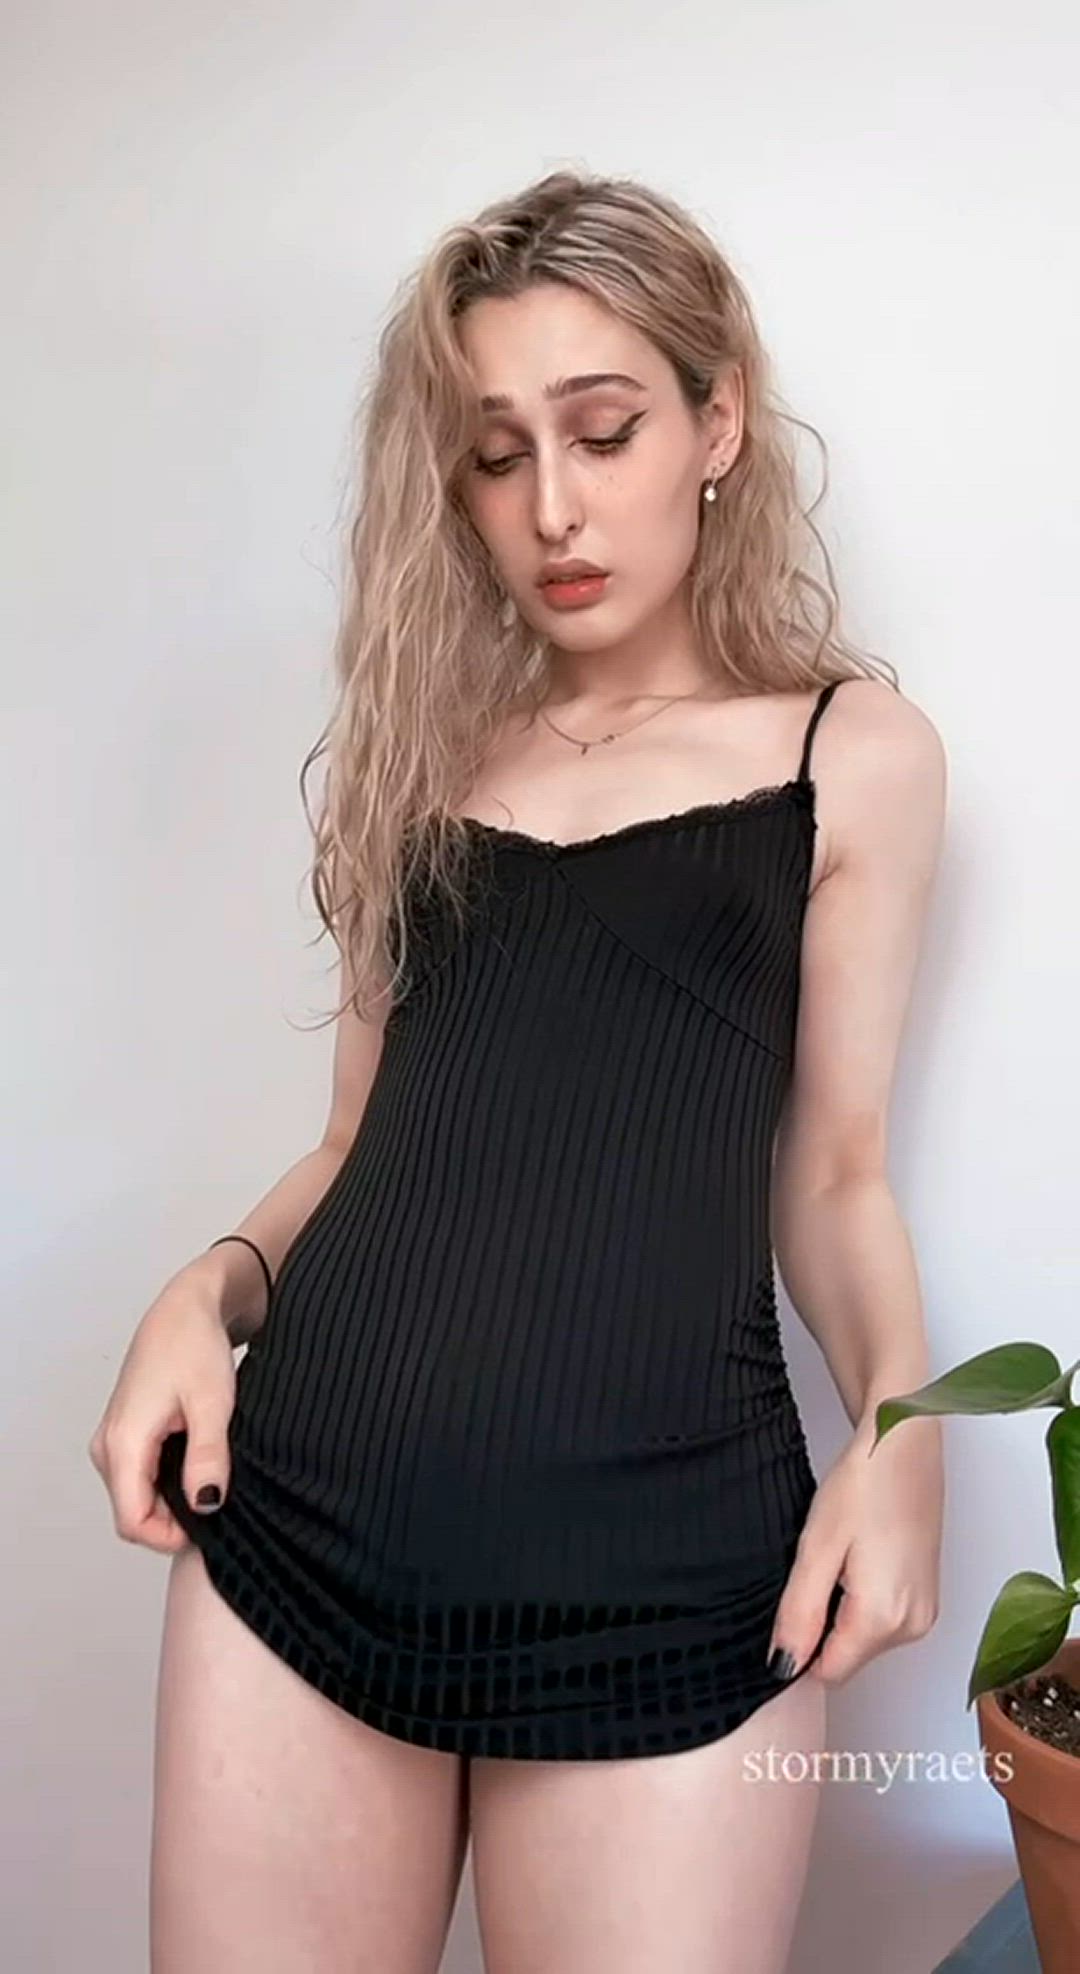 Amateur porn video with onlyfans model stormyyraets <strong>@stormyraets</strong>